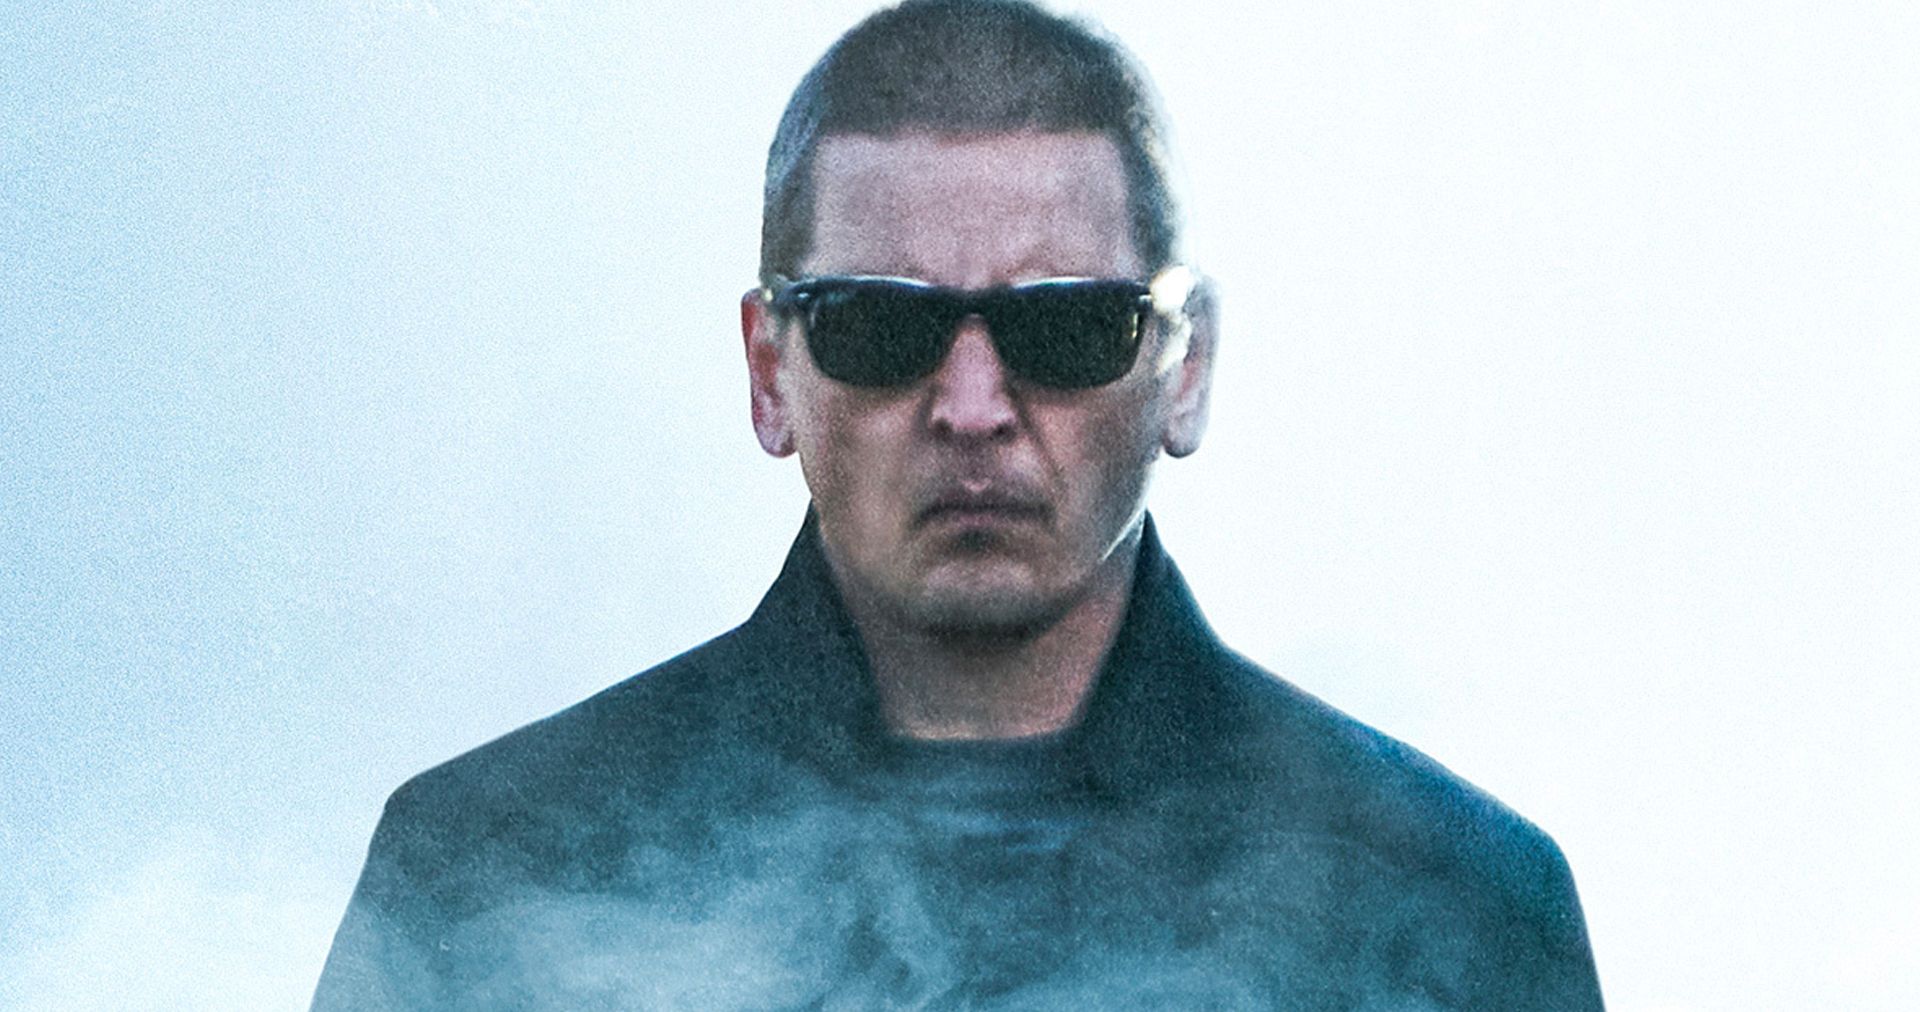 Trigger Point Preview Pits Barry Pepper Against Dark Government Operatives [Exclusive]